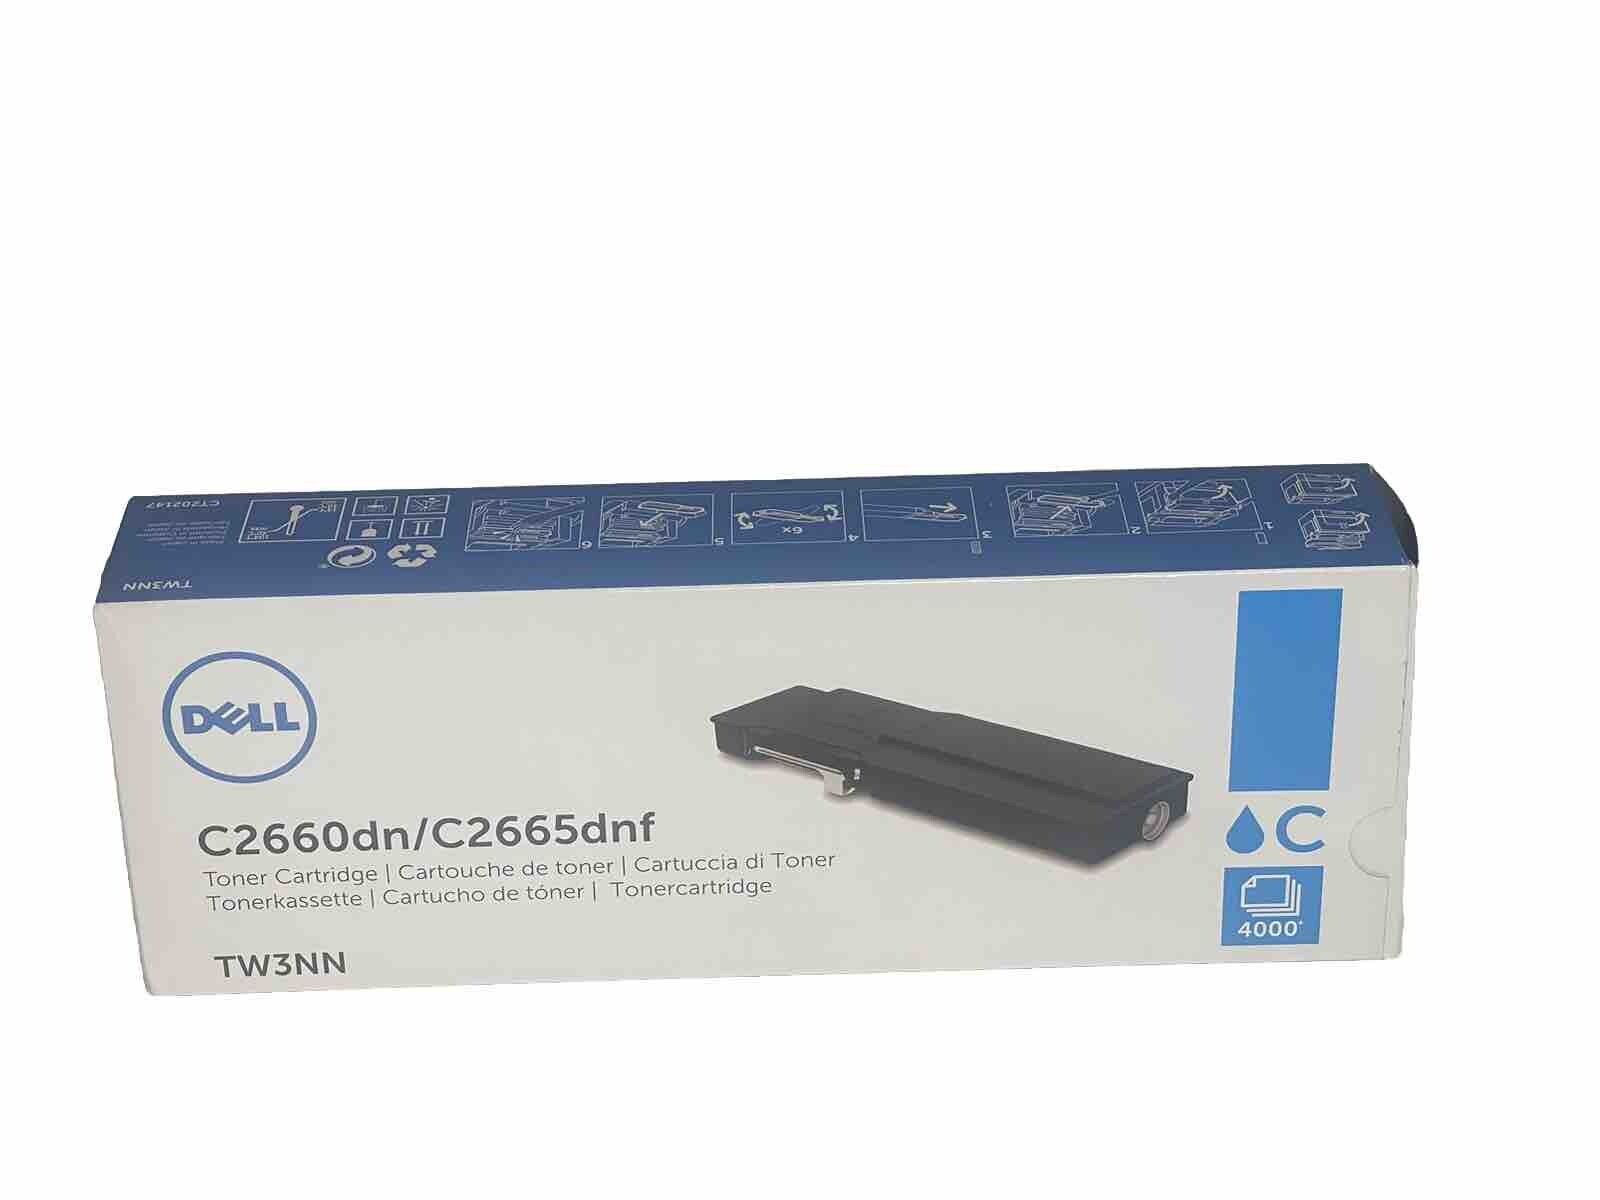 Dell TW3NN High Yield Cyan Toner For Dell C2600dn/C2665dnf ”Fast  “